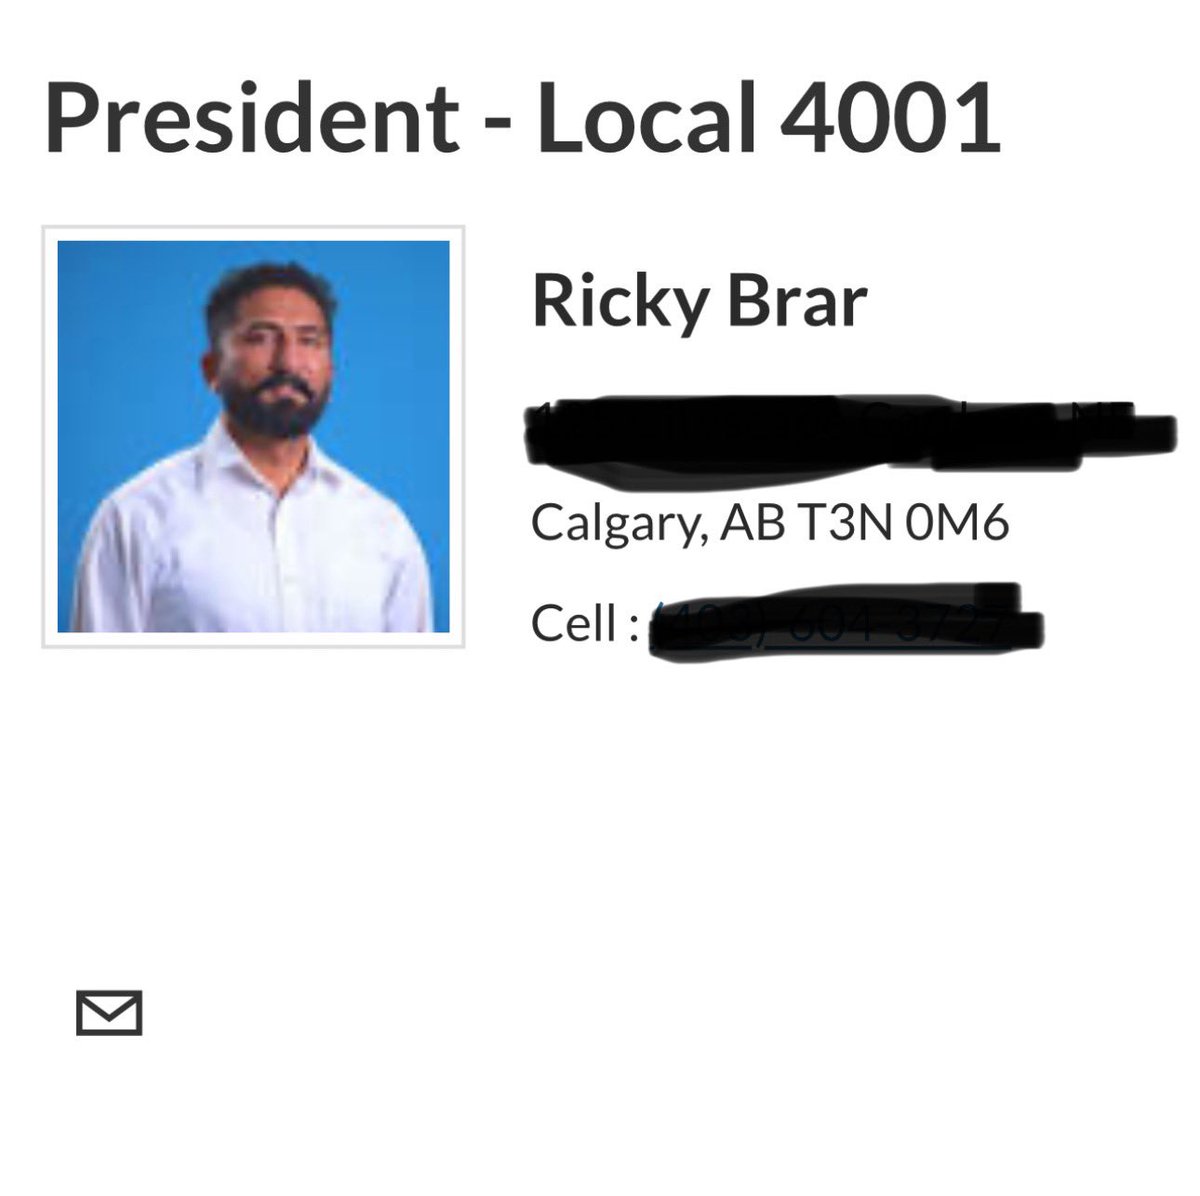 So the president of local 4001 is Ricky Brar. We double checked the unifor website and everything!

/2